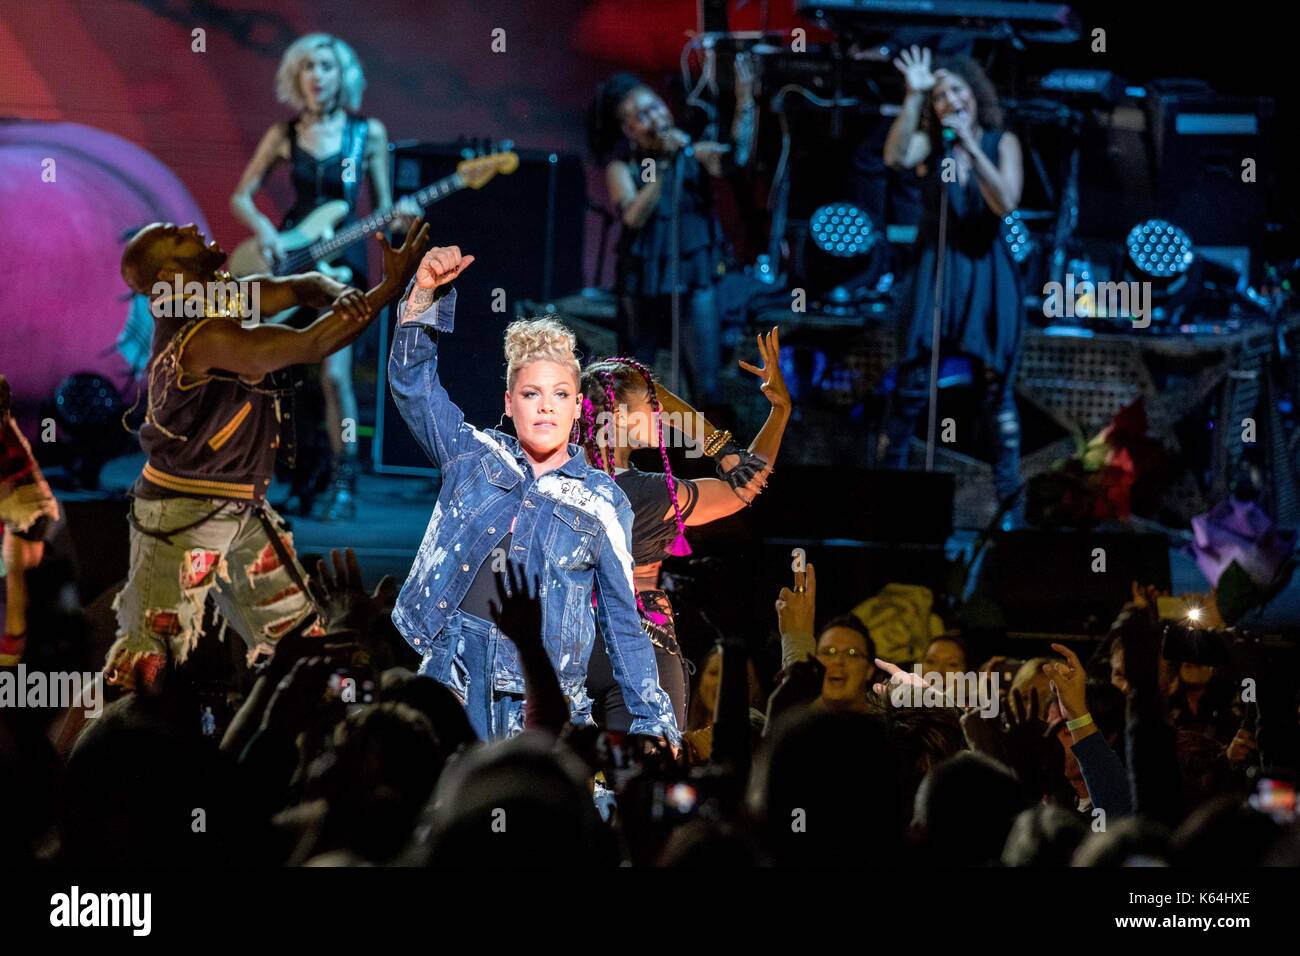 Tinley Park, Illinois, USA. 9th Sep, 2017. Singer P!NK (ALECIA MOORE) performs live in concert at Hollywood Casino Amphitheatre in Tinley Park, Illinois Credit: Daniel DeSlover/ZUMA Wire/Alamy Live News Stock Photo